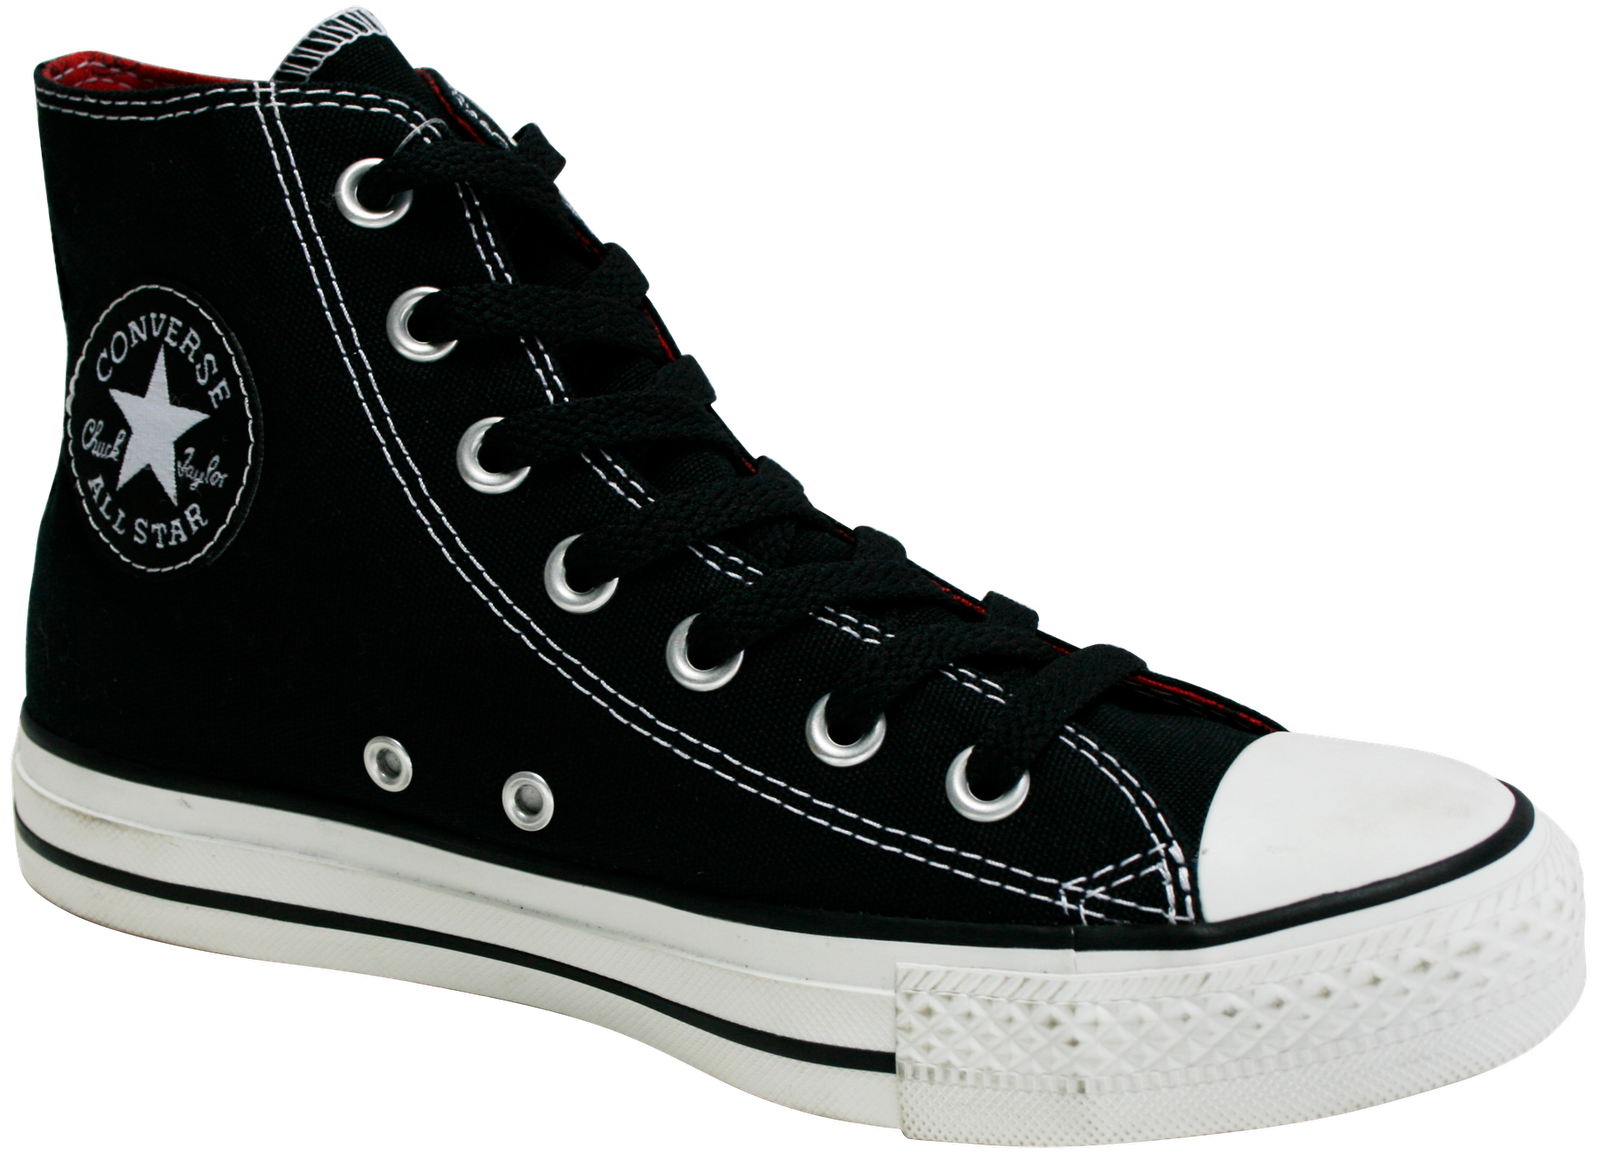 Converse Philippines: Sneak Week Watch Thursday - Rock the Classic Look!